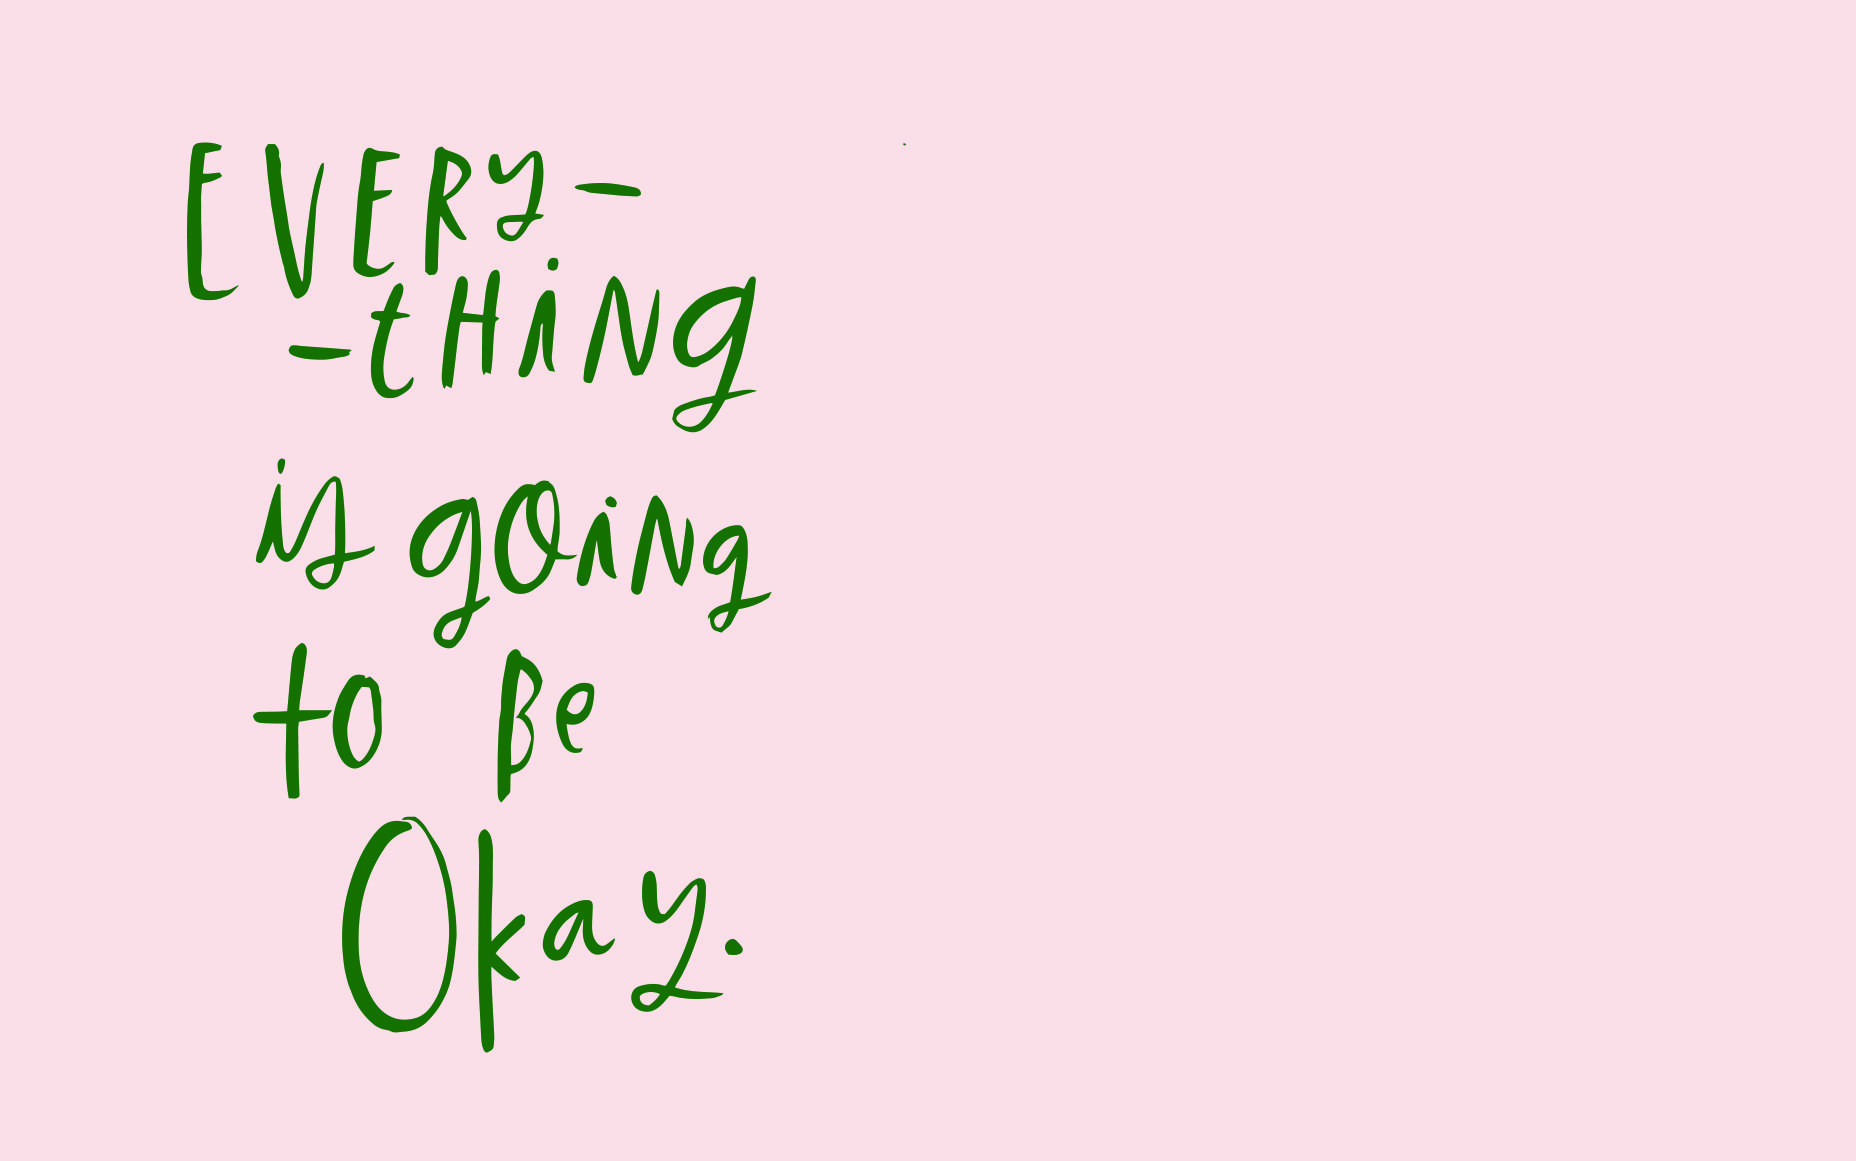 everything is going to be okay.com. Desktop wallpaper quotes, Laptop wallpaper quotes, Desktop wallpaper design